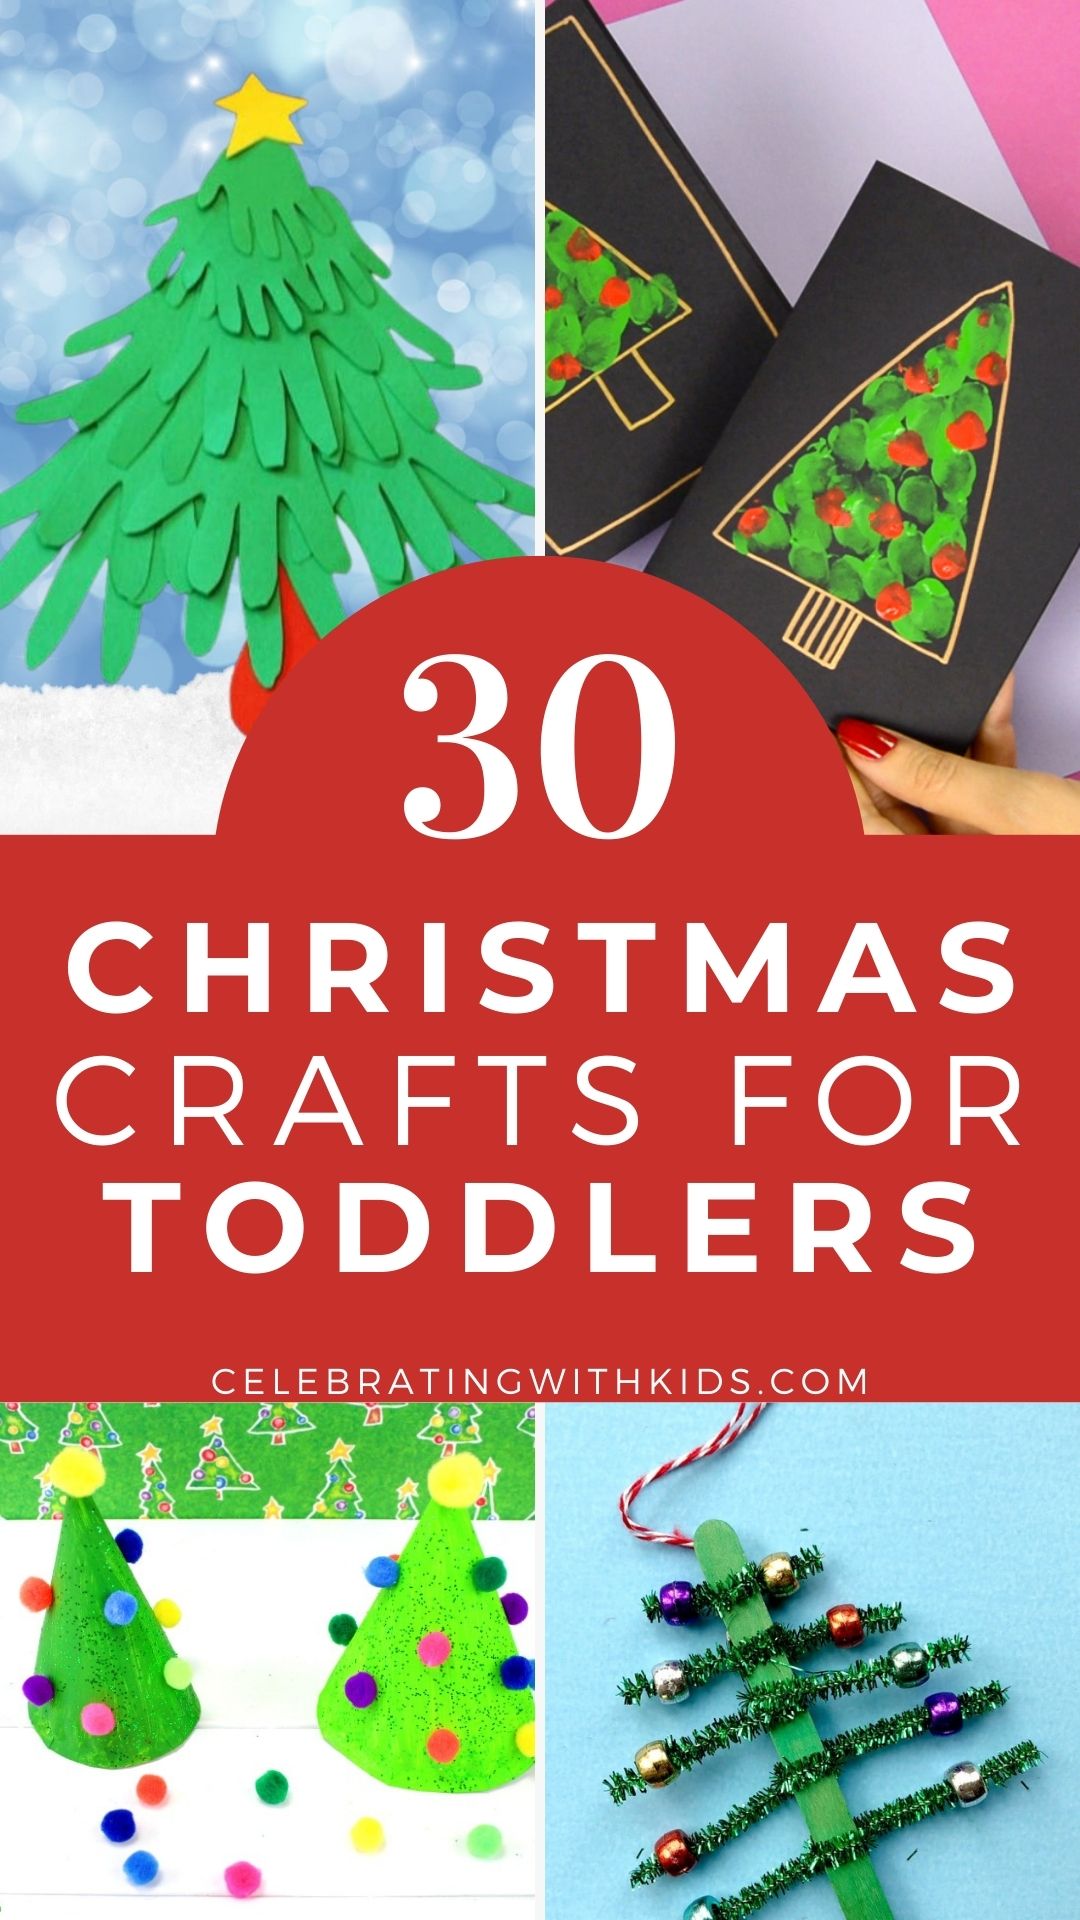 30 Christmas Crafts for Toddlers